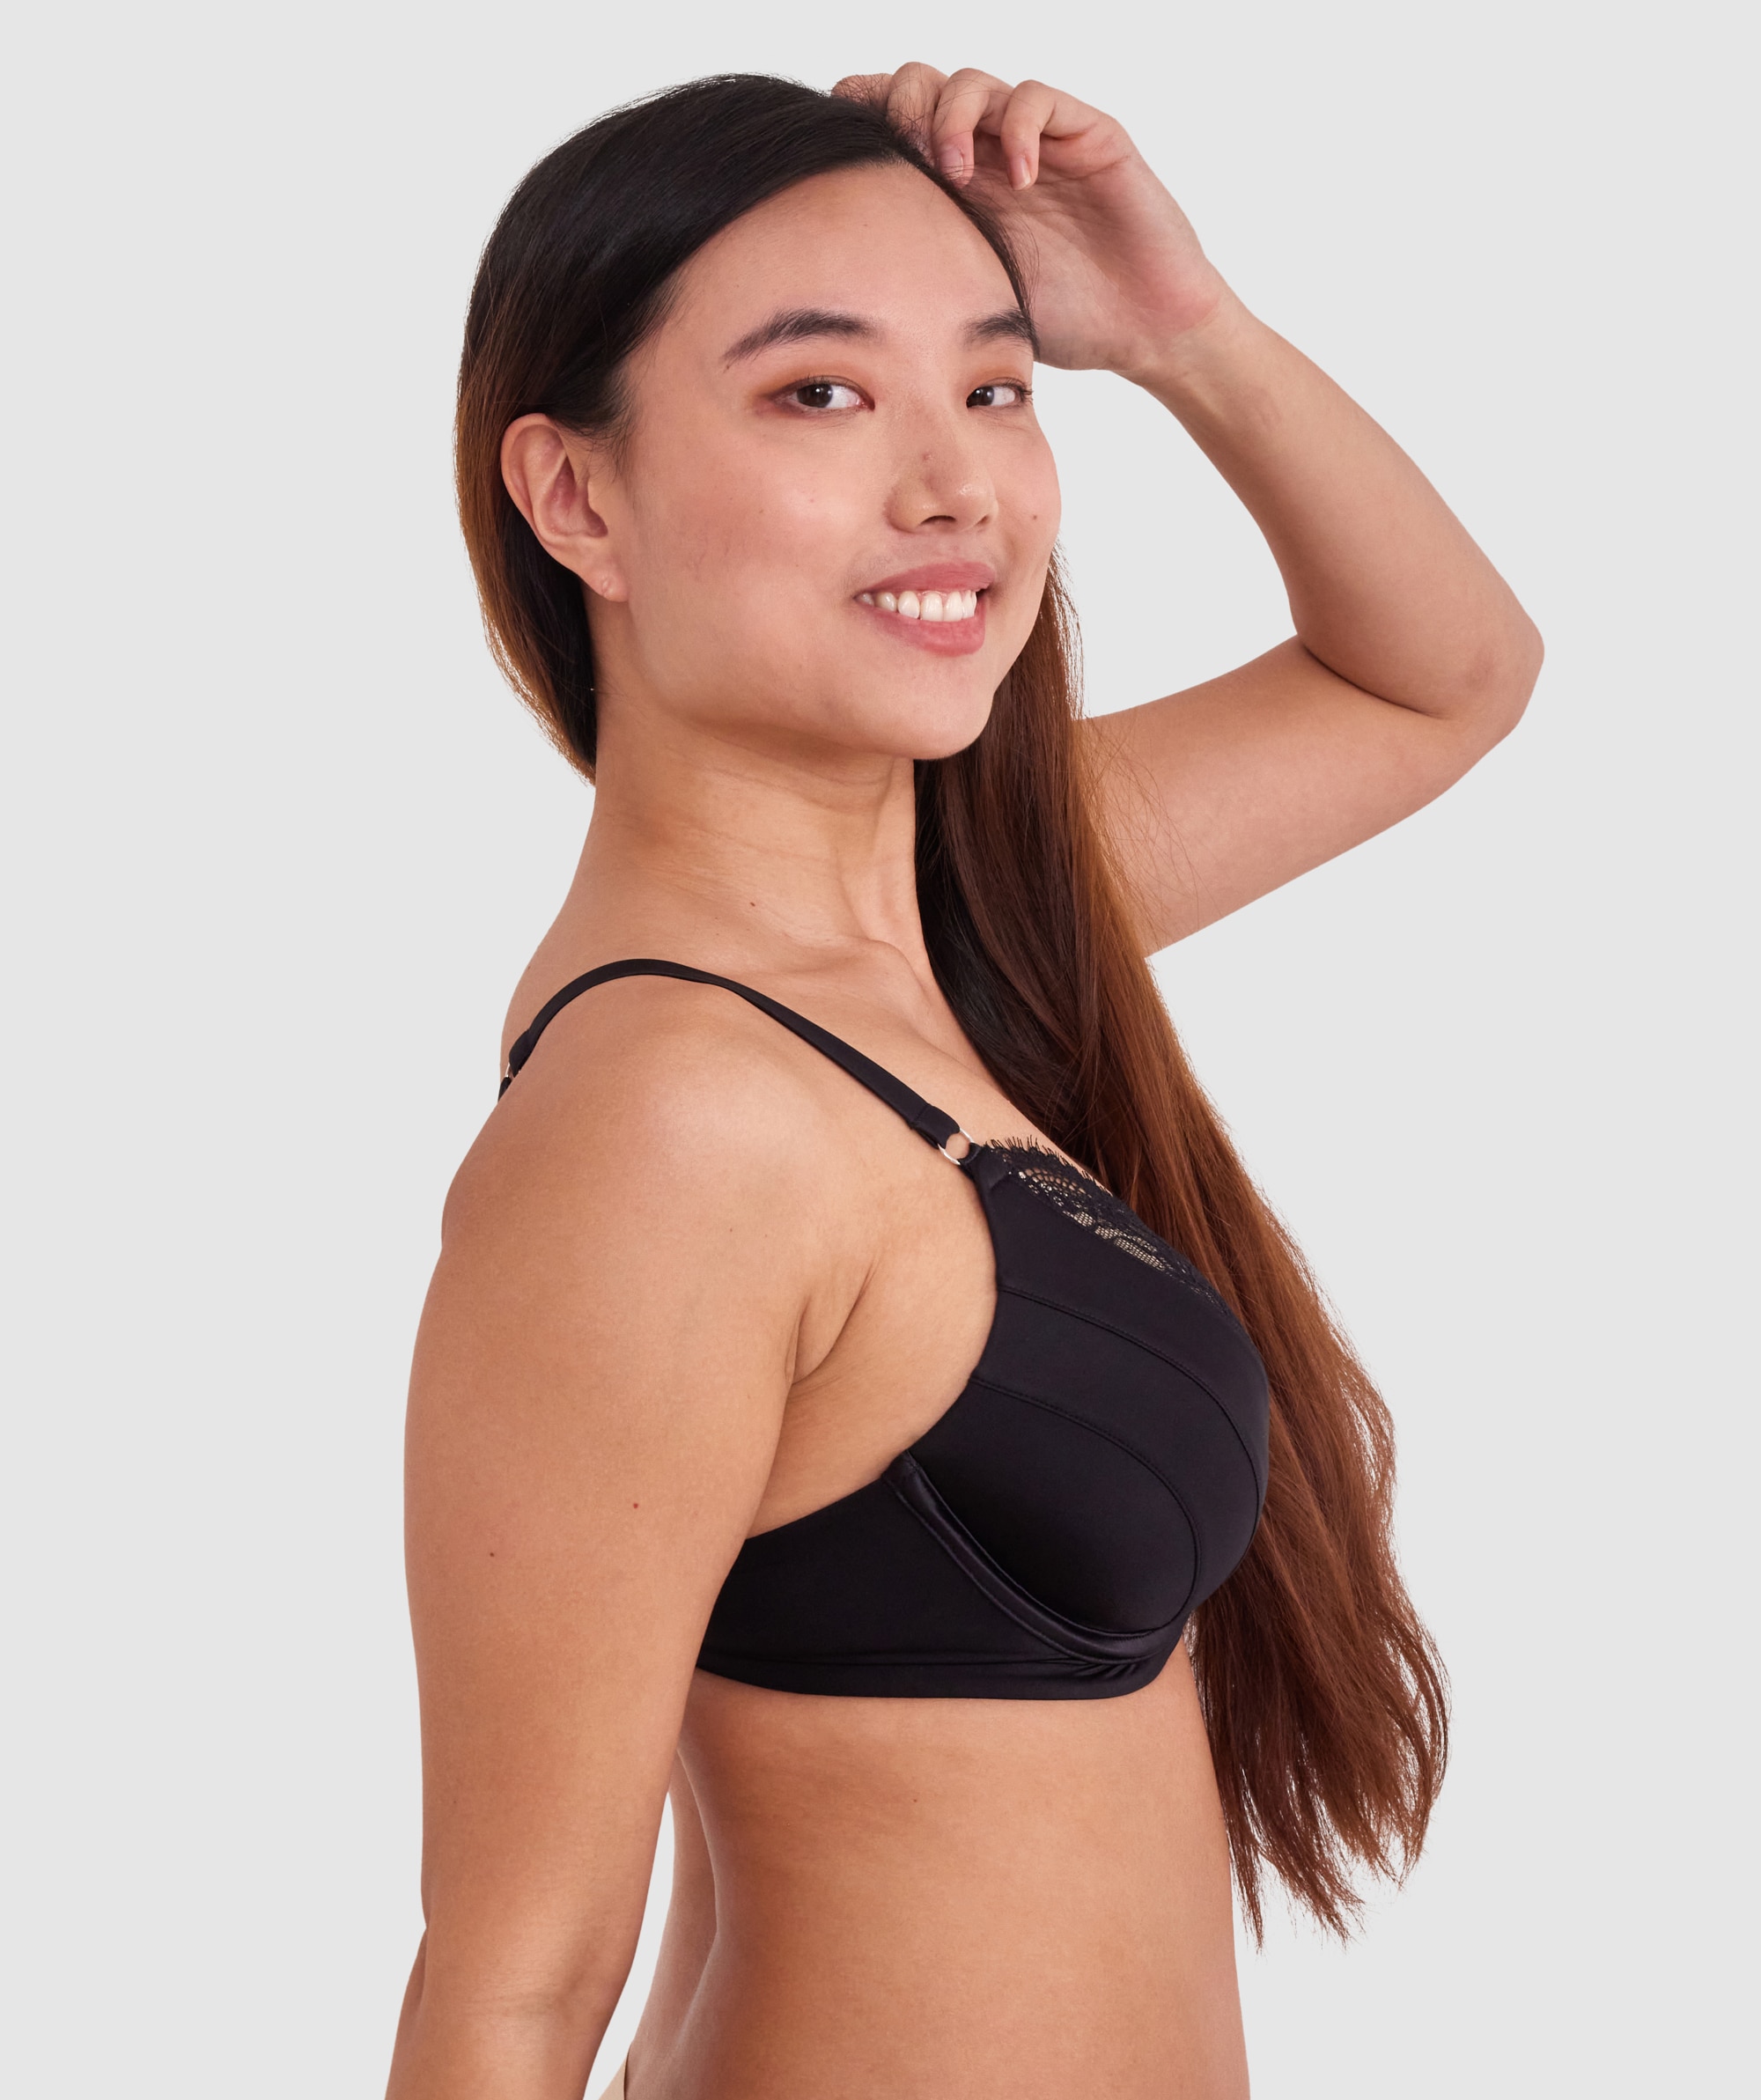 Sale][US] $20+cost of shipping, (36G UK) PrimaDonna unlined wired sports bra,  more info in the comment : r/braswap